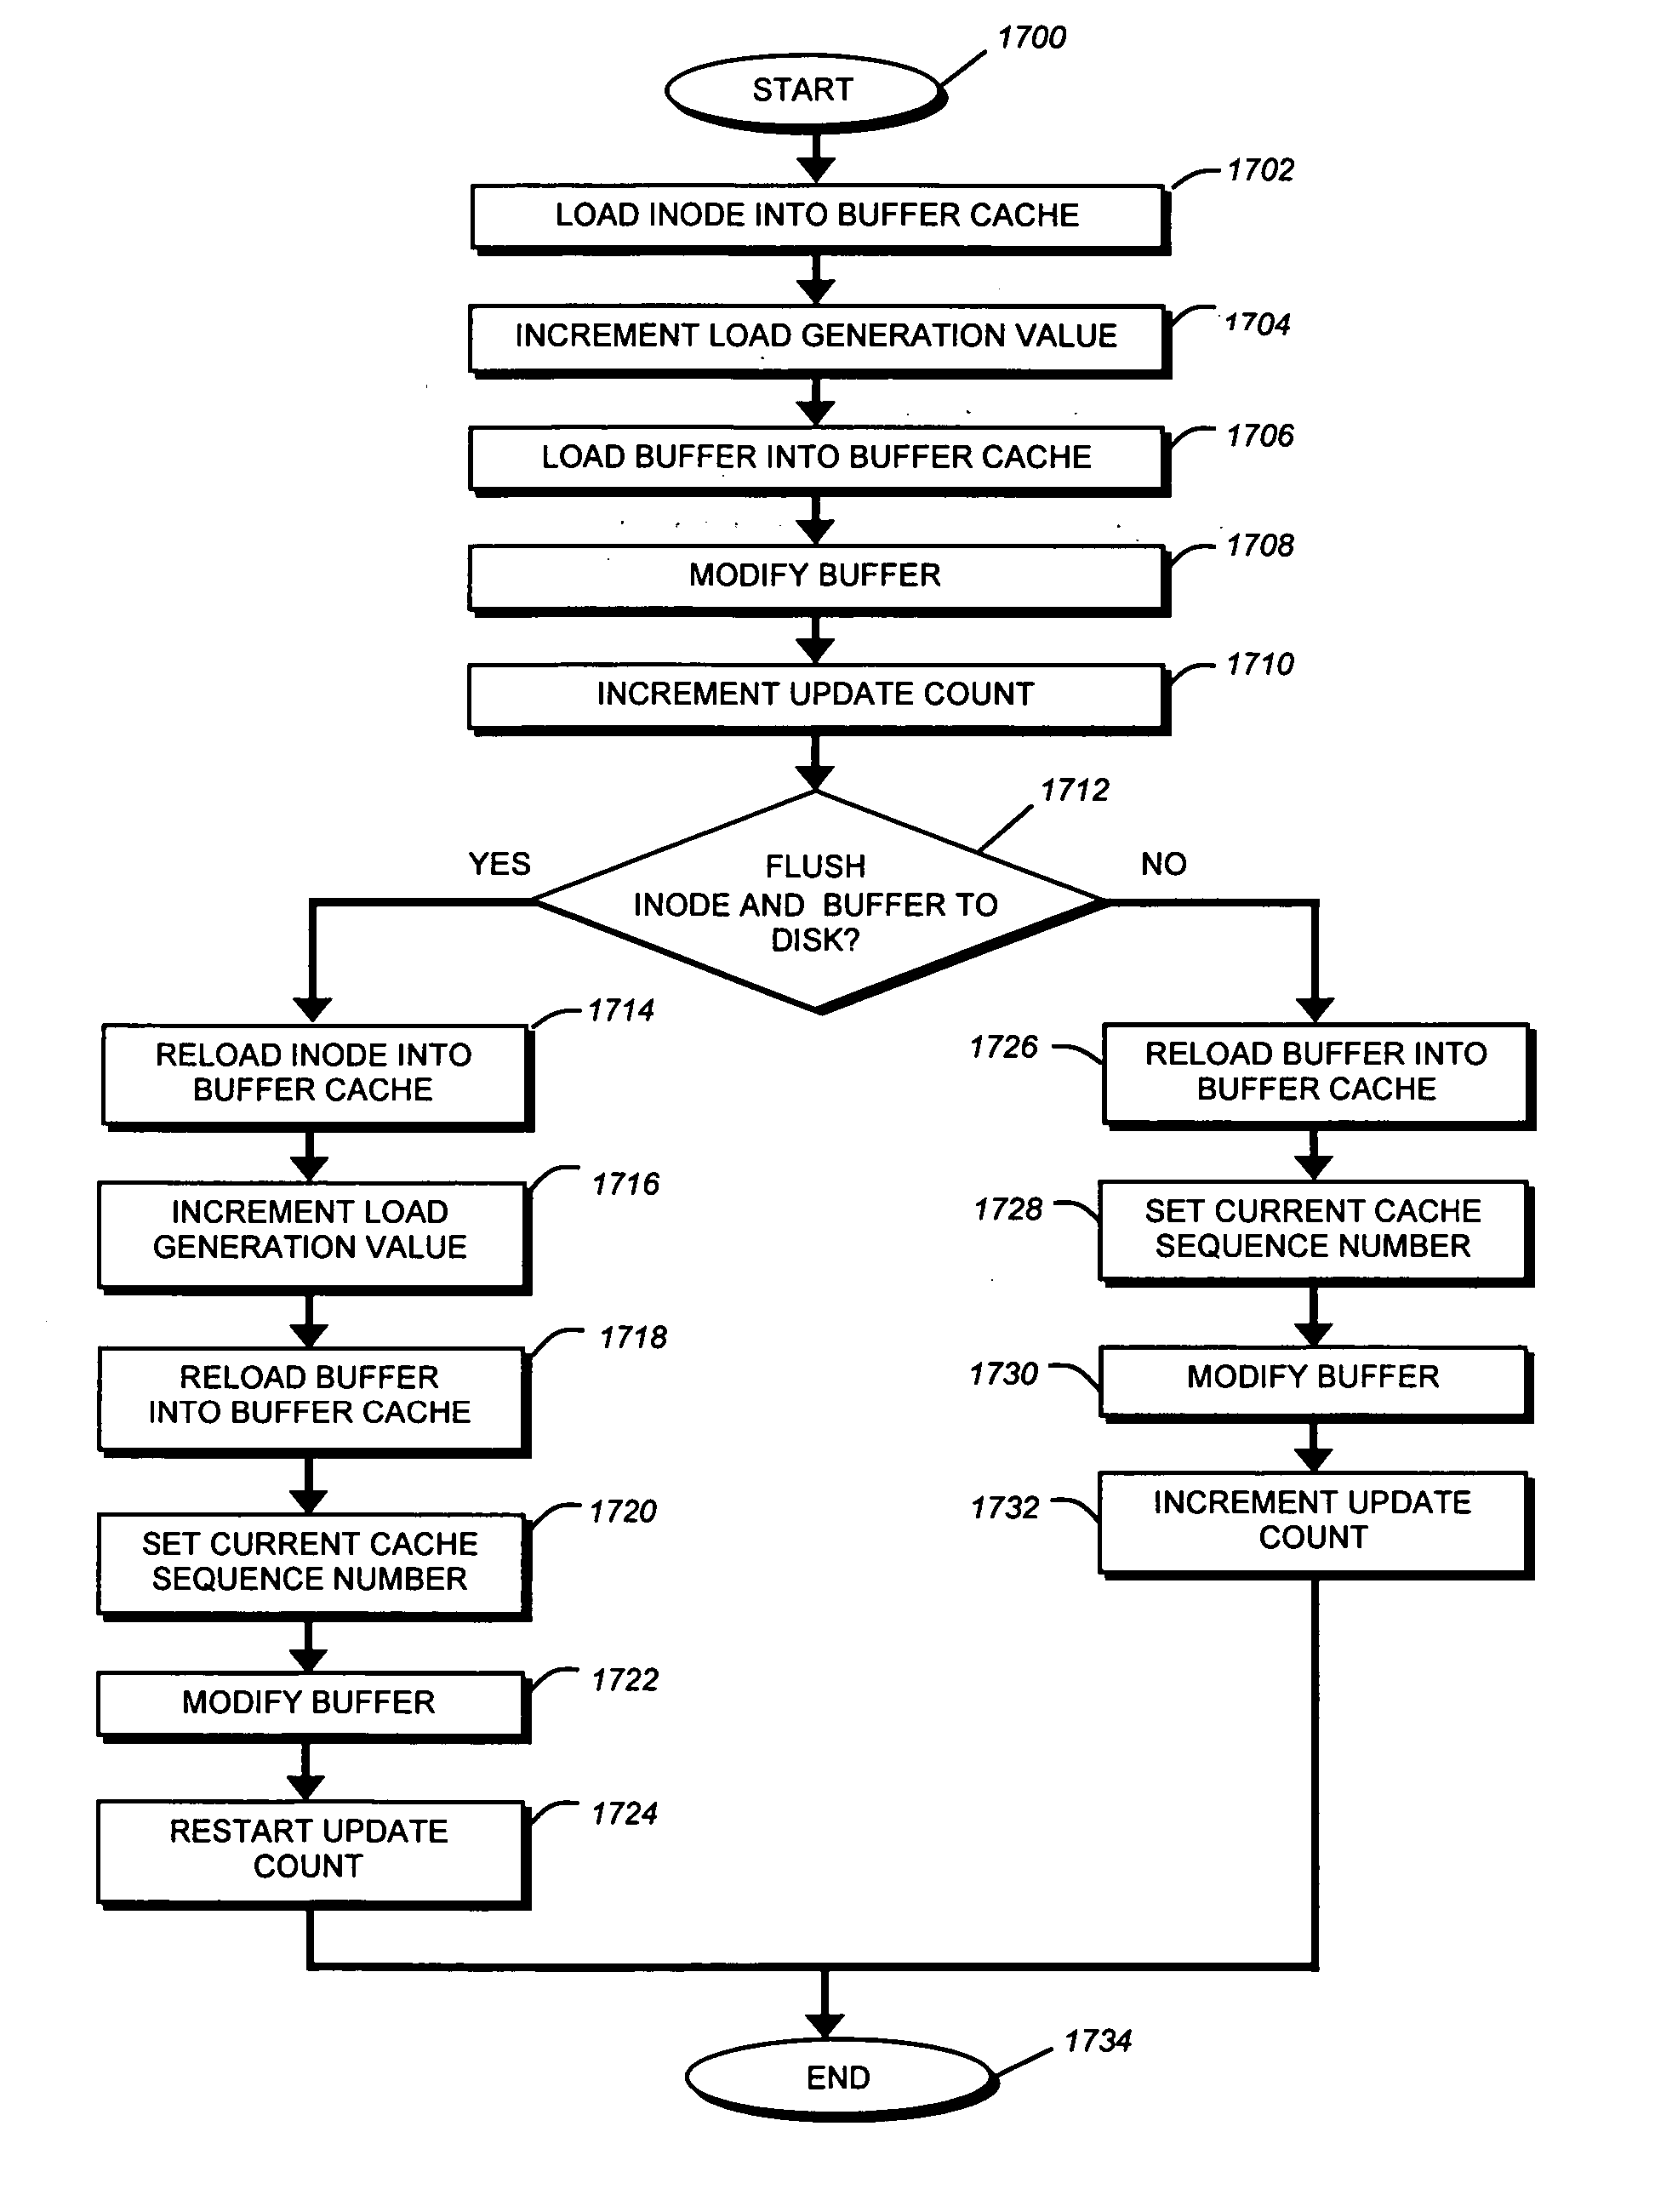 Lightweight coherency control protocol for clustered storage system